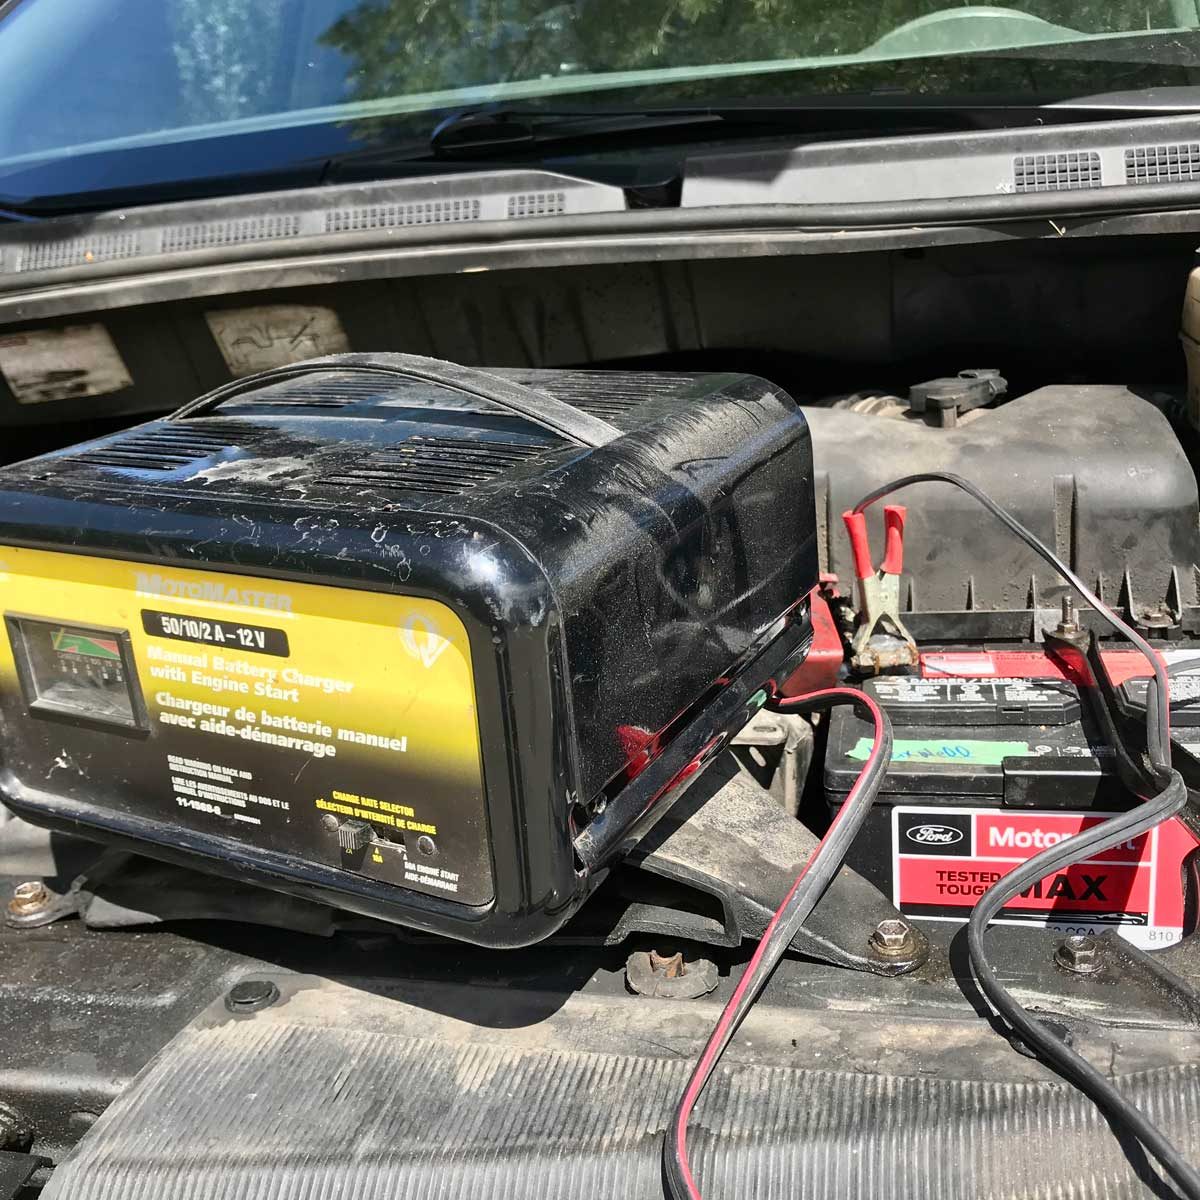 How to Charge a Car Battery - Easy Instructions